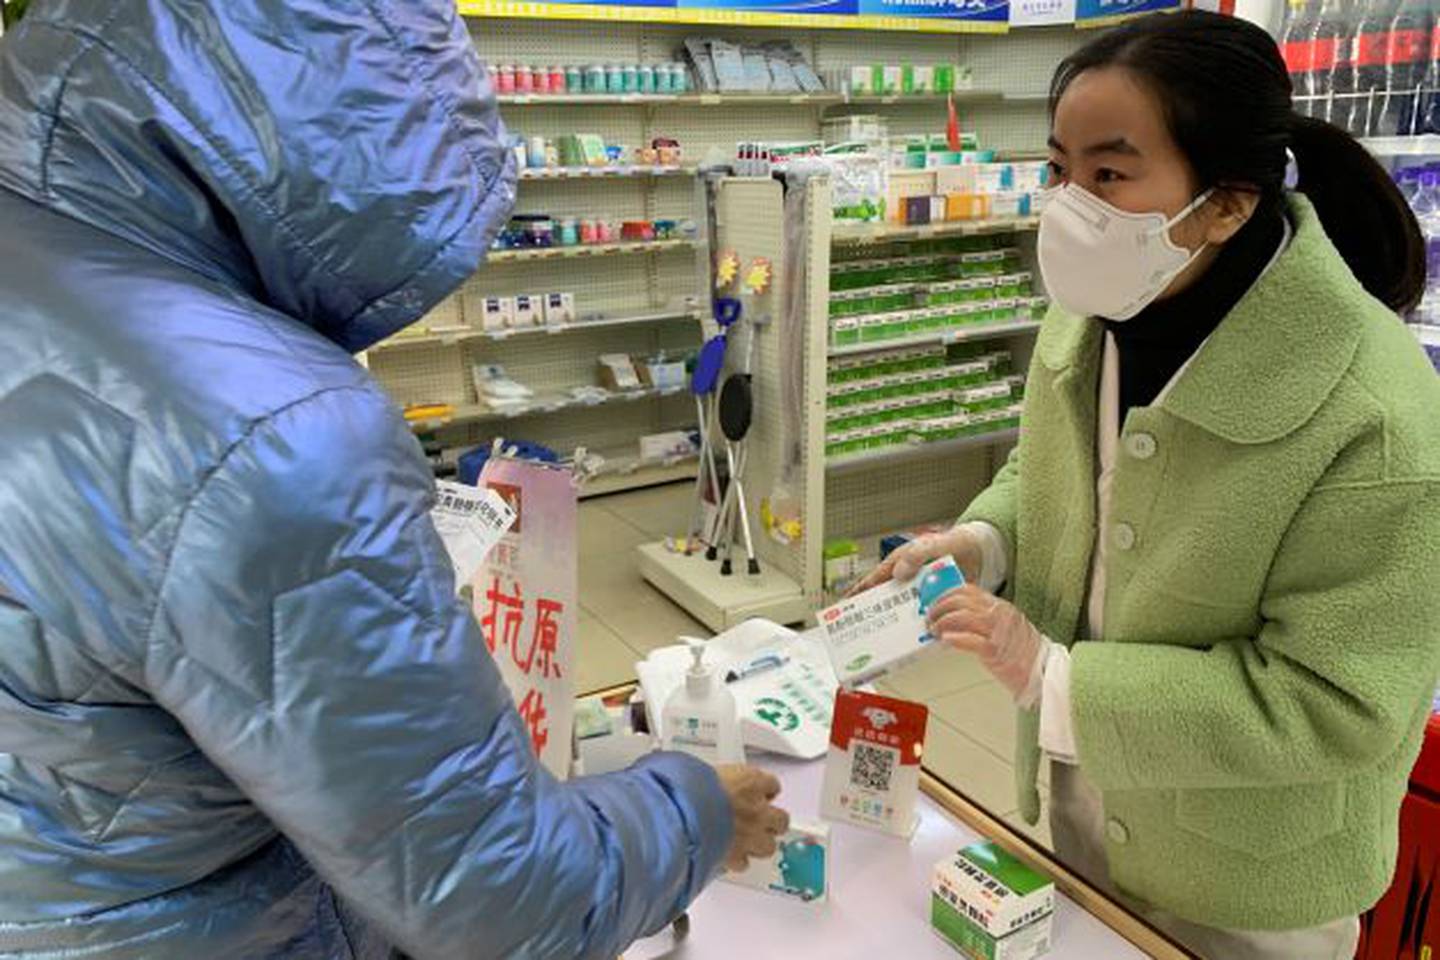 Pharmacist prepares medication for a customer at a pharmacy in Beijing. China's National Health Commission scaled down its daily Covid-19 report, in response to a sharp decline in PCR testing since the government eased antivirus measures after daily cases hit record highs. Photo / AP